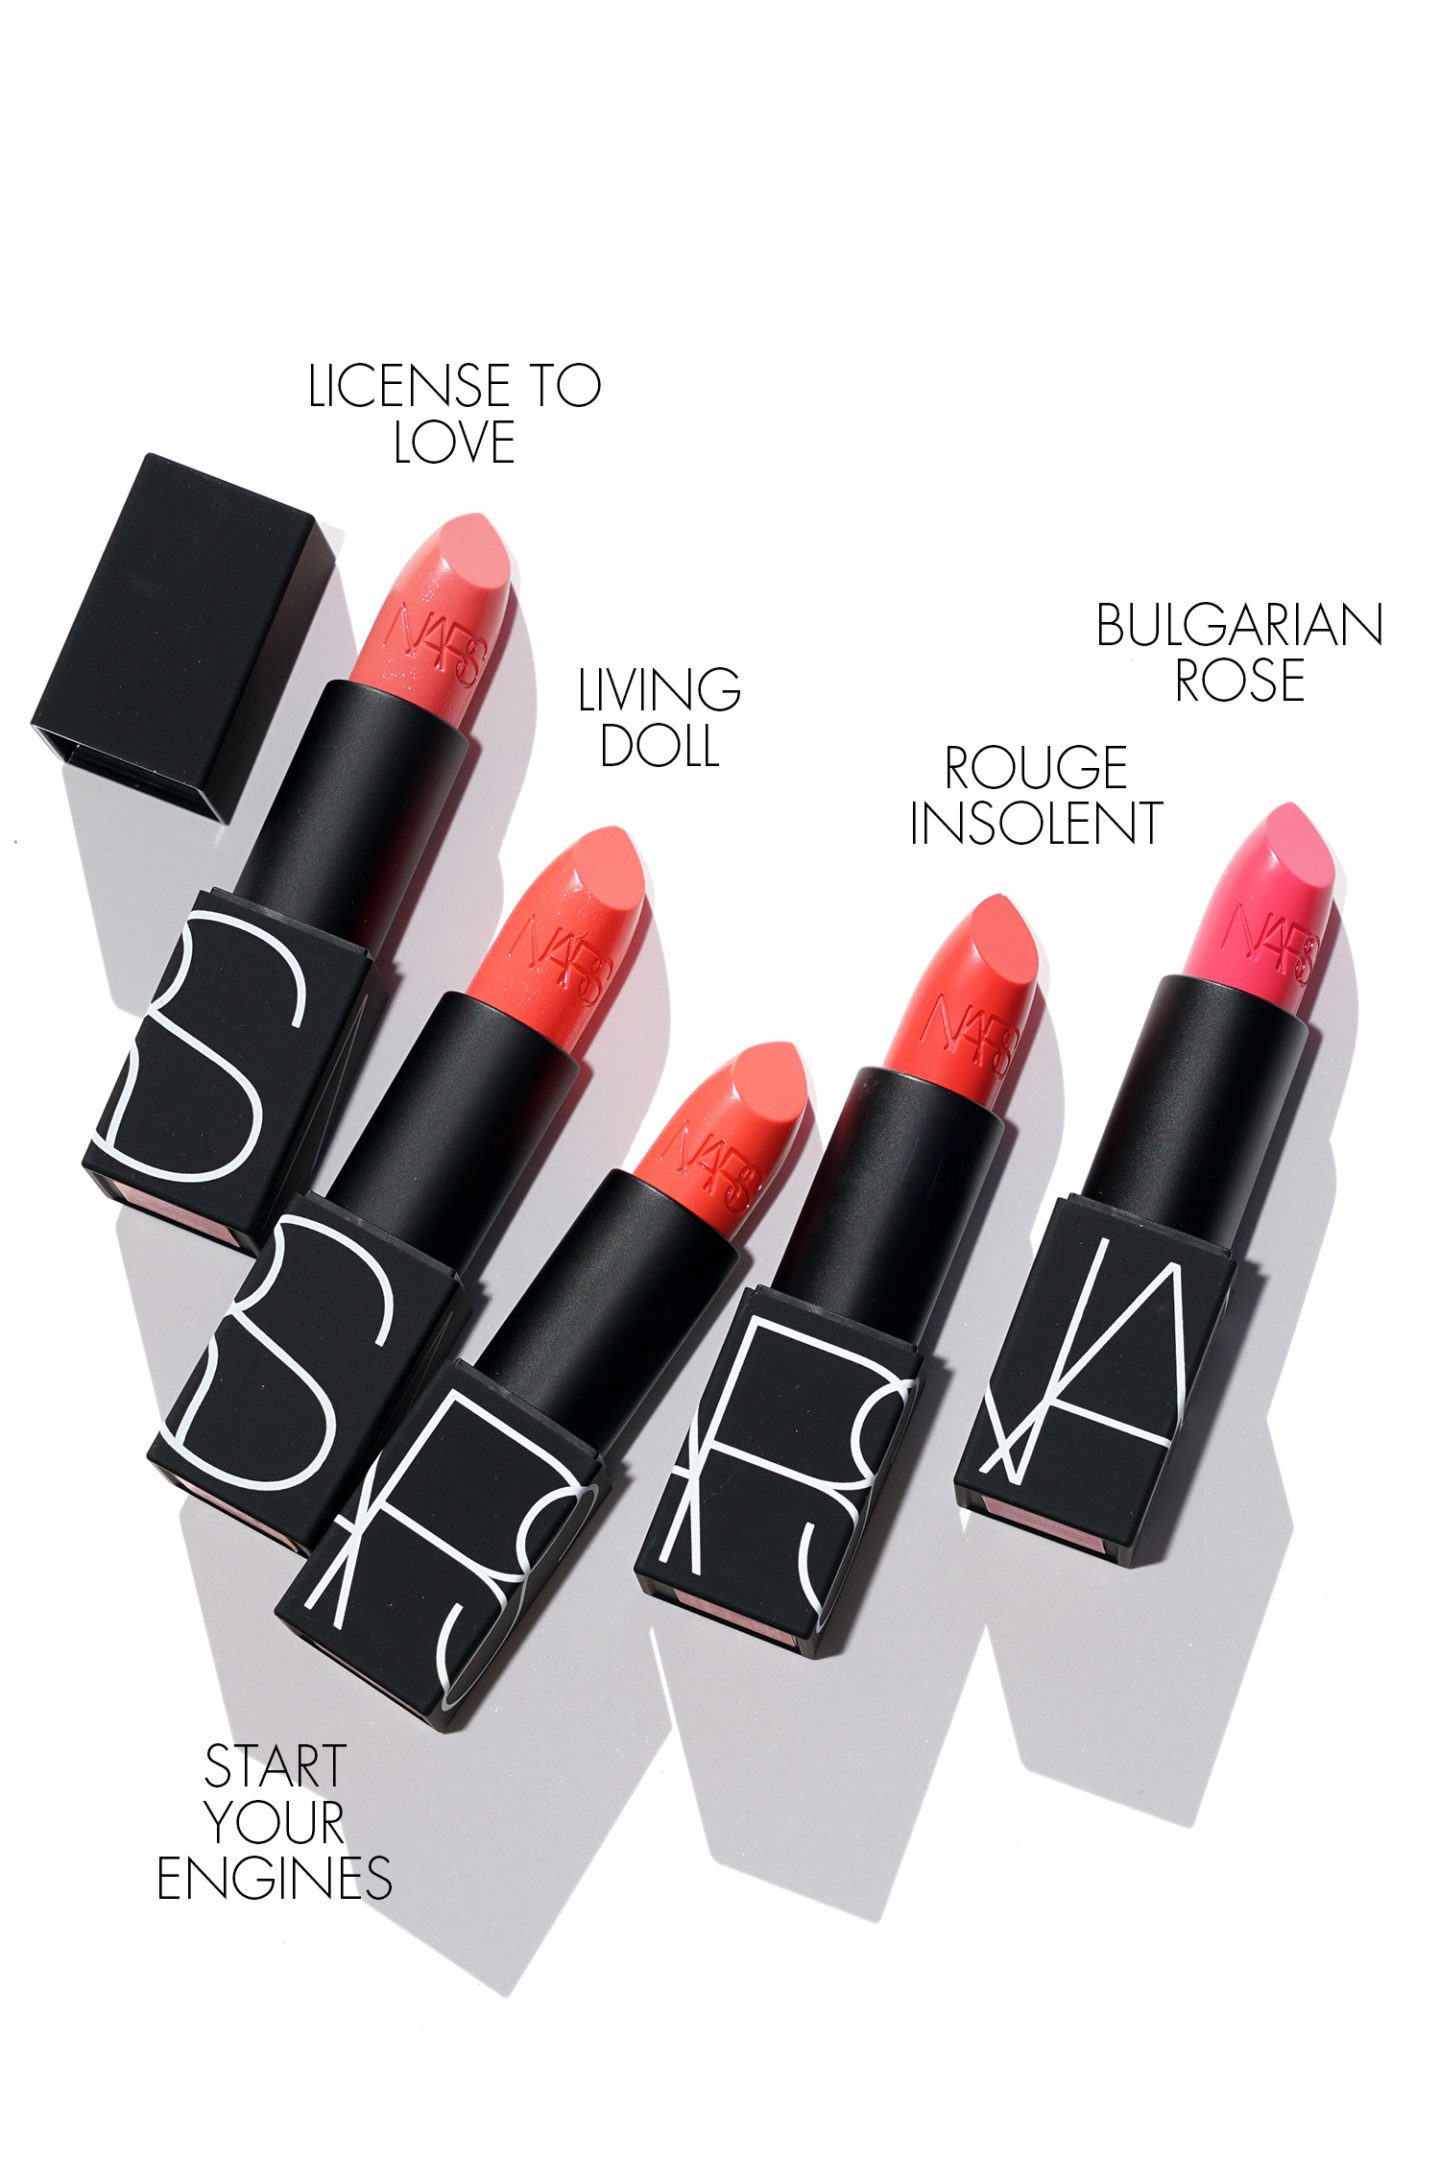 NARS Lipsticks License to Love, Living Doll, Start Your Engines, Rouge Insolent, Bulgarian Rose